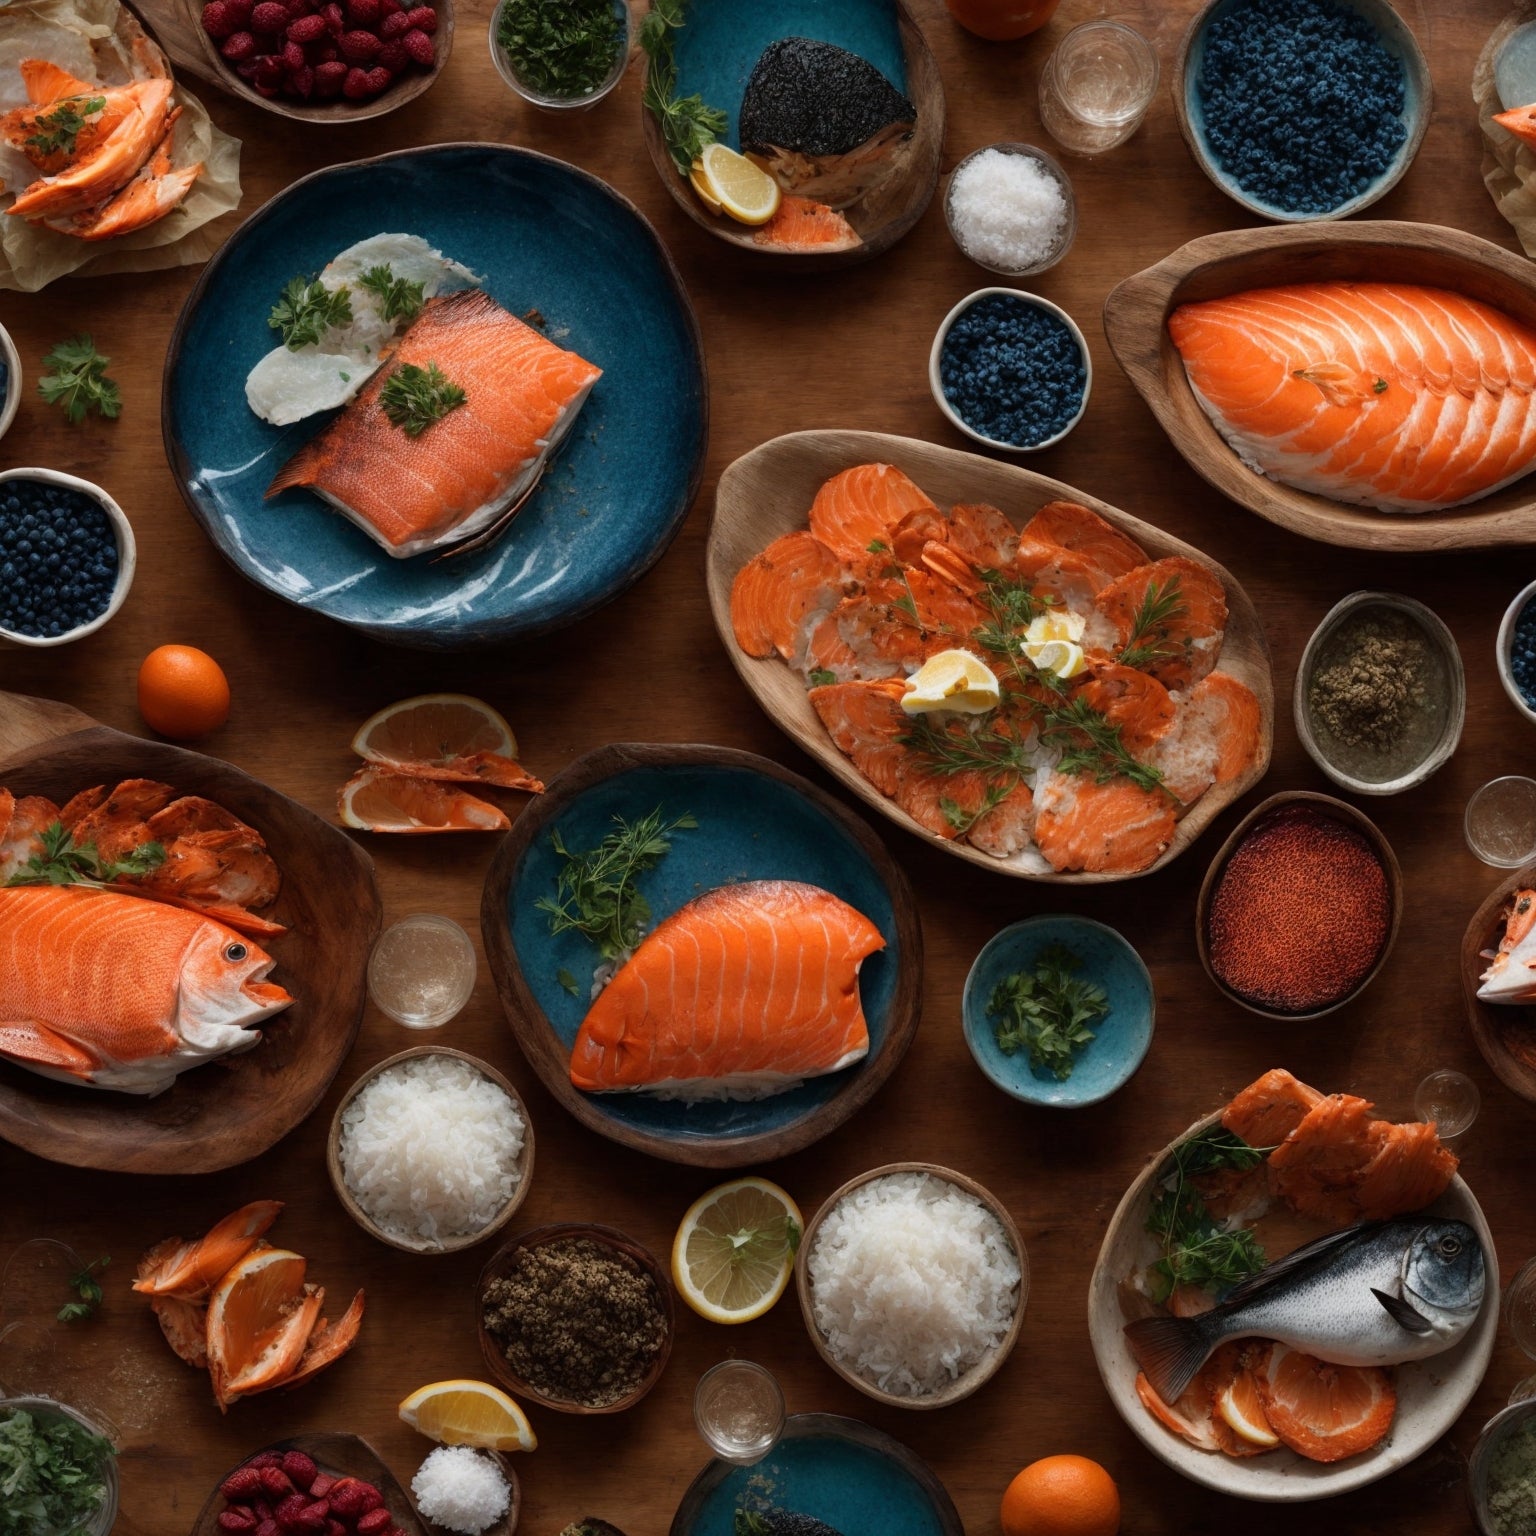 Global Seafoods' Commitment: Discover Sustainable Seafood Options